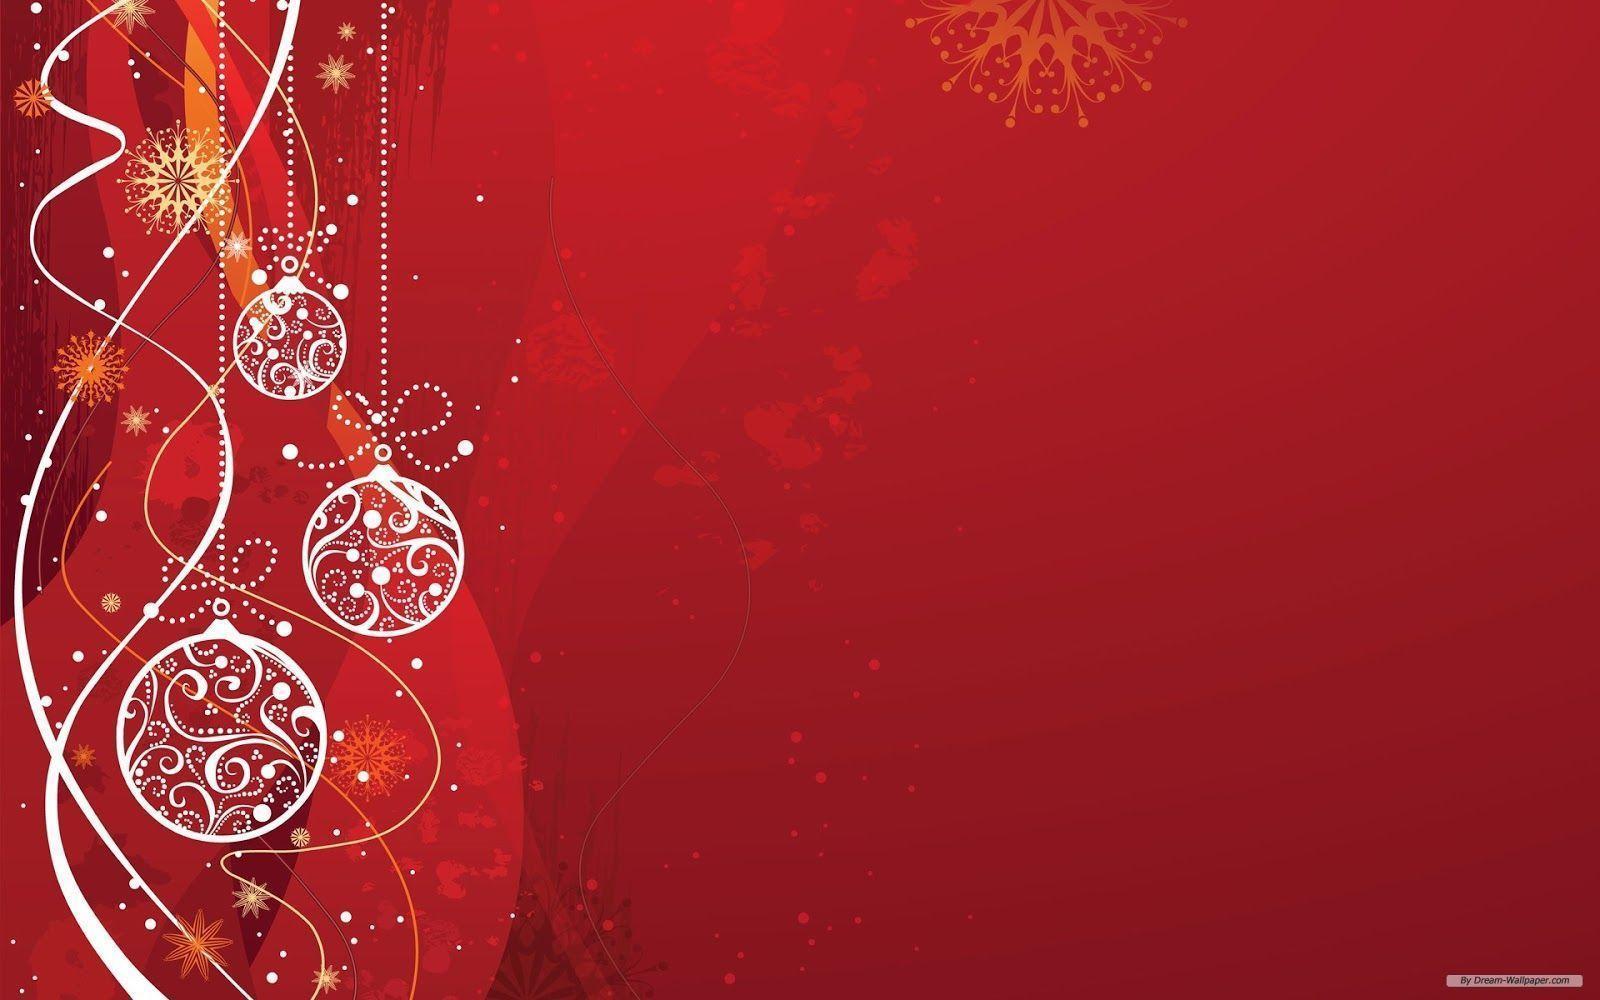 Background Free Holiday Wallpaper Background Kindle Pics